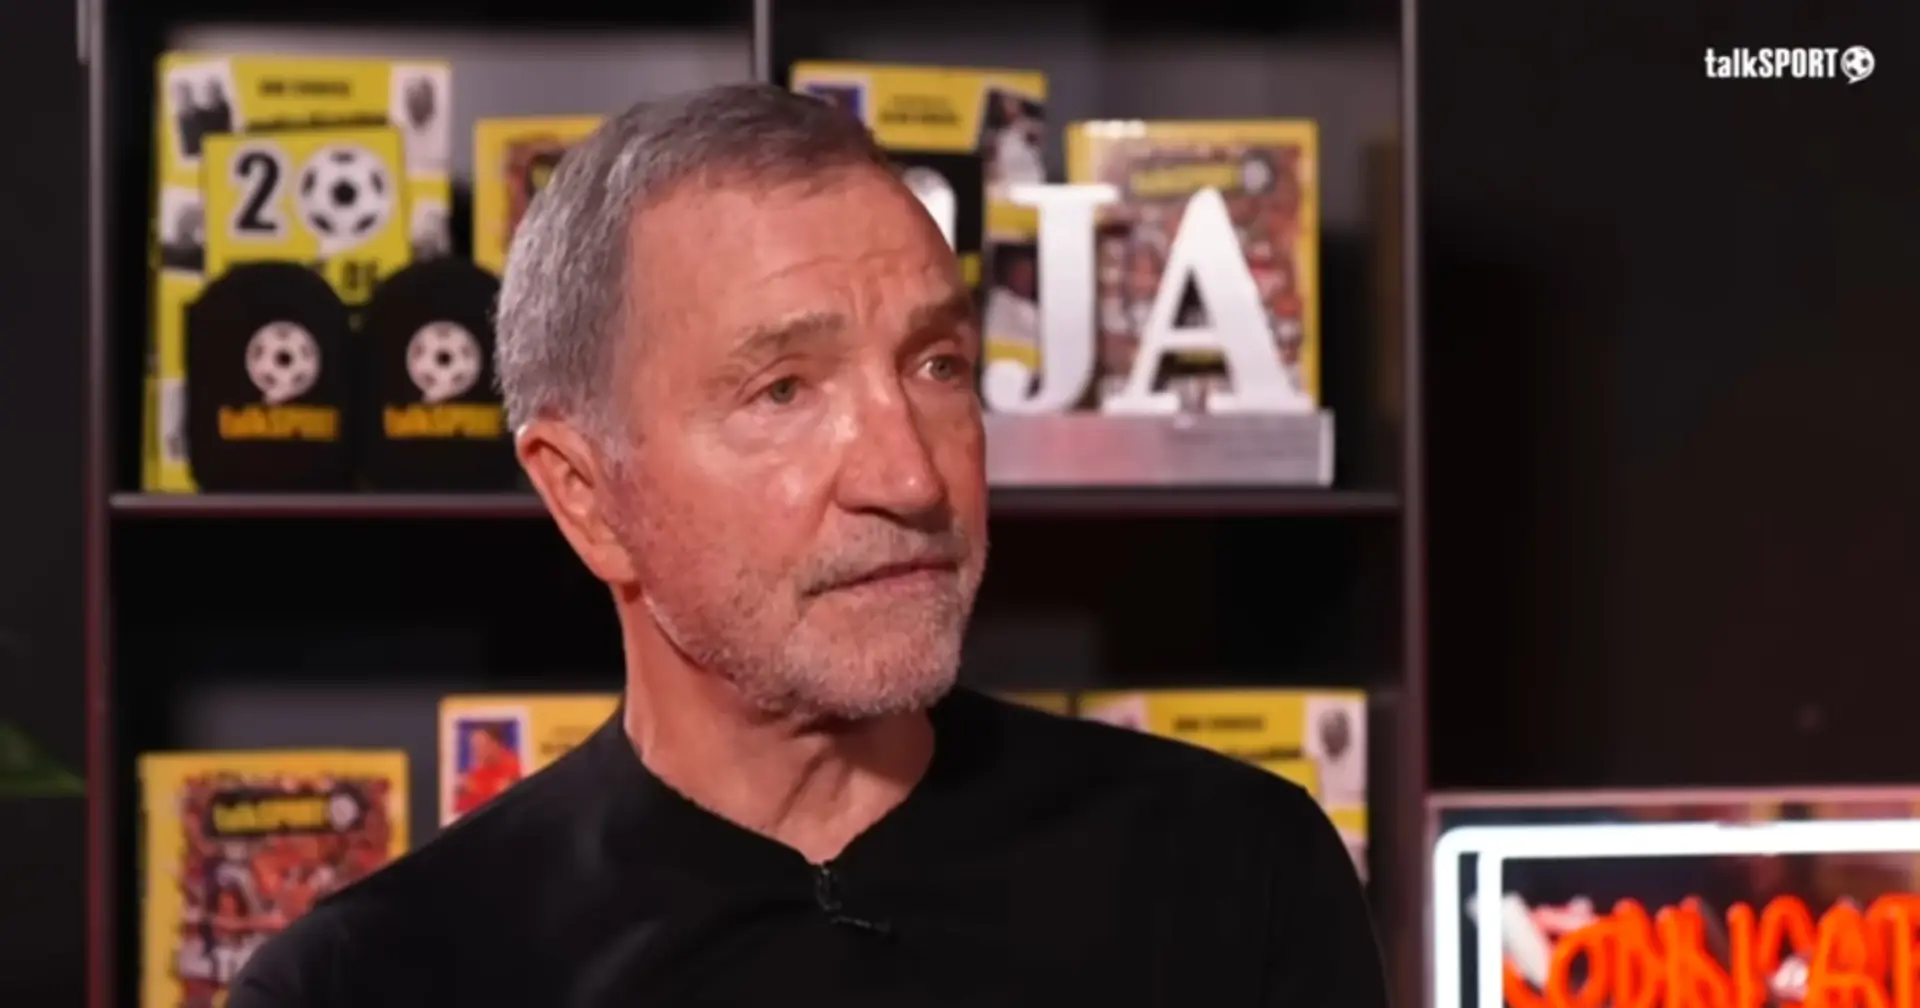 Sir Jim Ratcliffe wants Man United to be back on top in 3 years — Graeme Souness disagrees